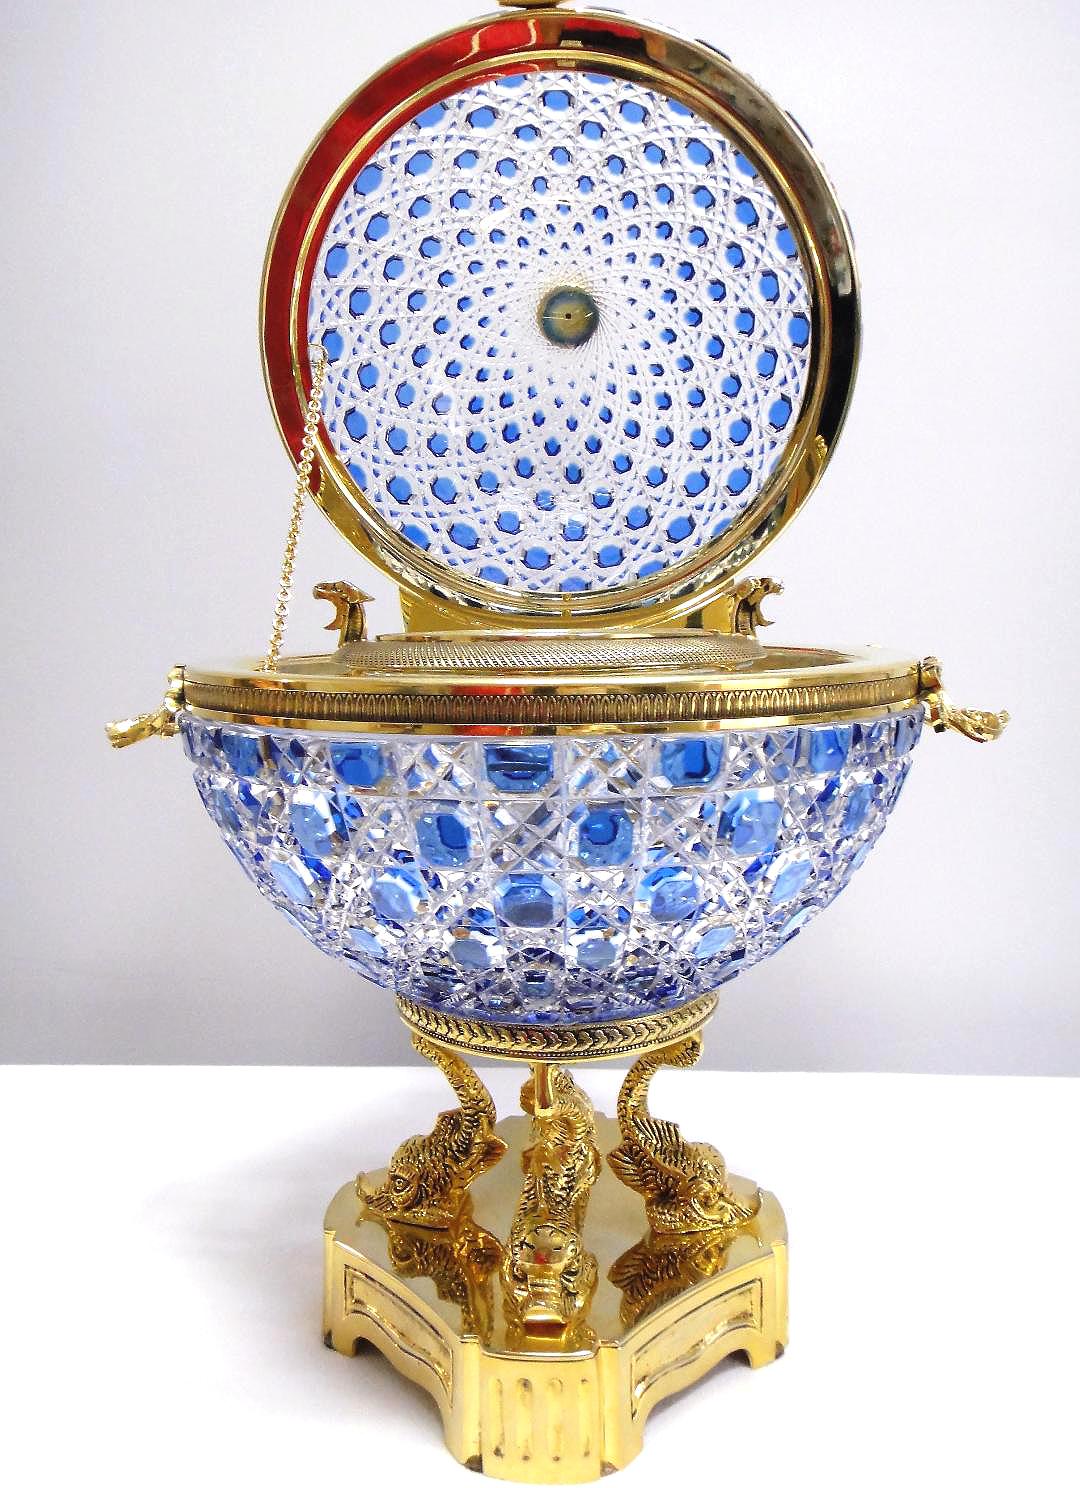 Monumental Caviar Bowl by Cristal Benito

Offered for sale is a monumental 20 inch tall cut crystal and 24-karat caviar bowl with a hinged lid by Cristal Benito originally designed as part of the 1950s collection. This spectacular piece is made in